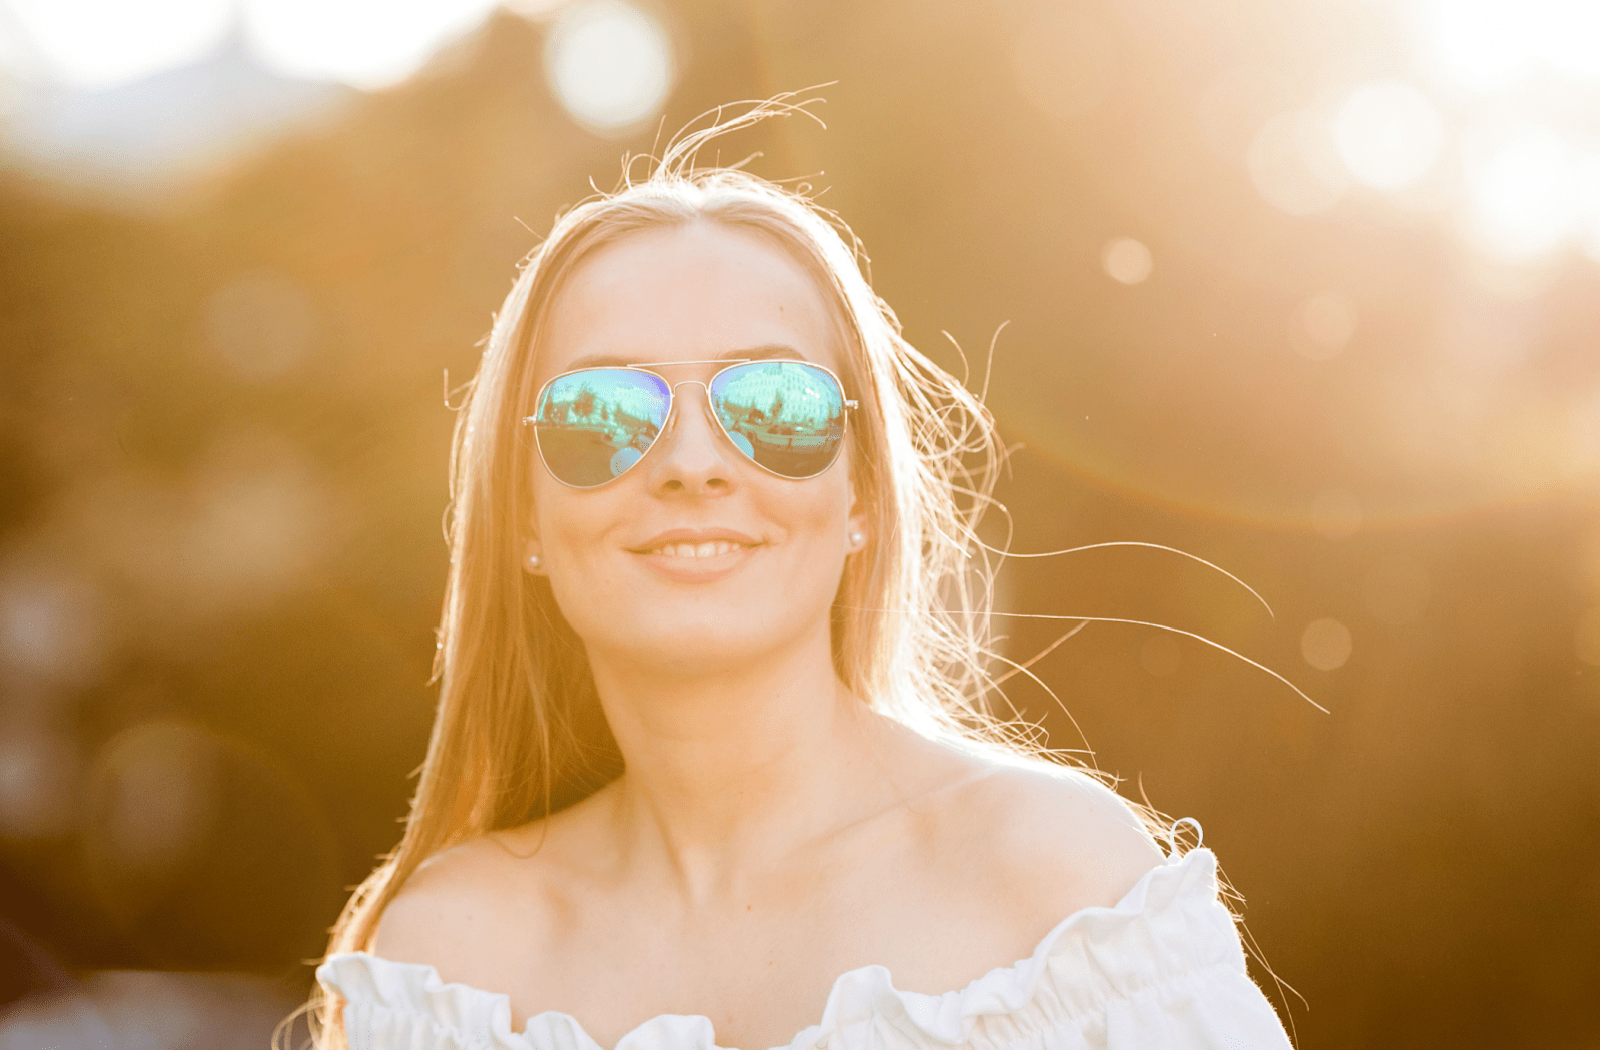 A young woman smiling while standing outside and wearing polarized sunglasses to protect her eyes.